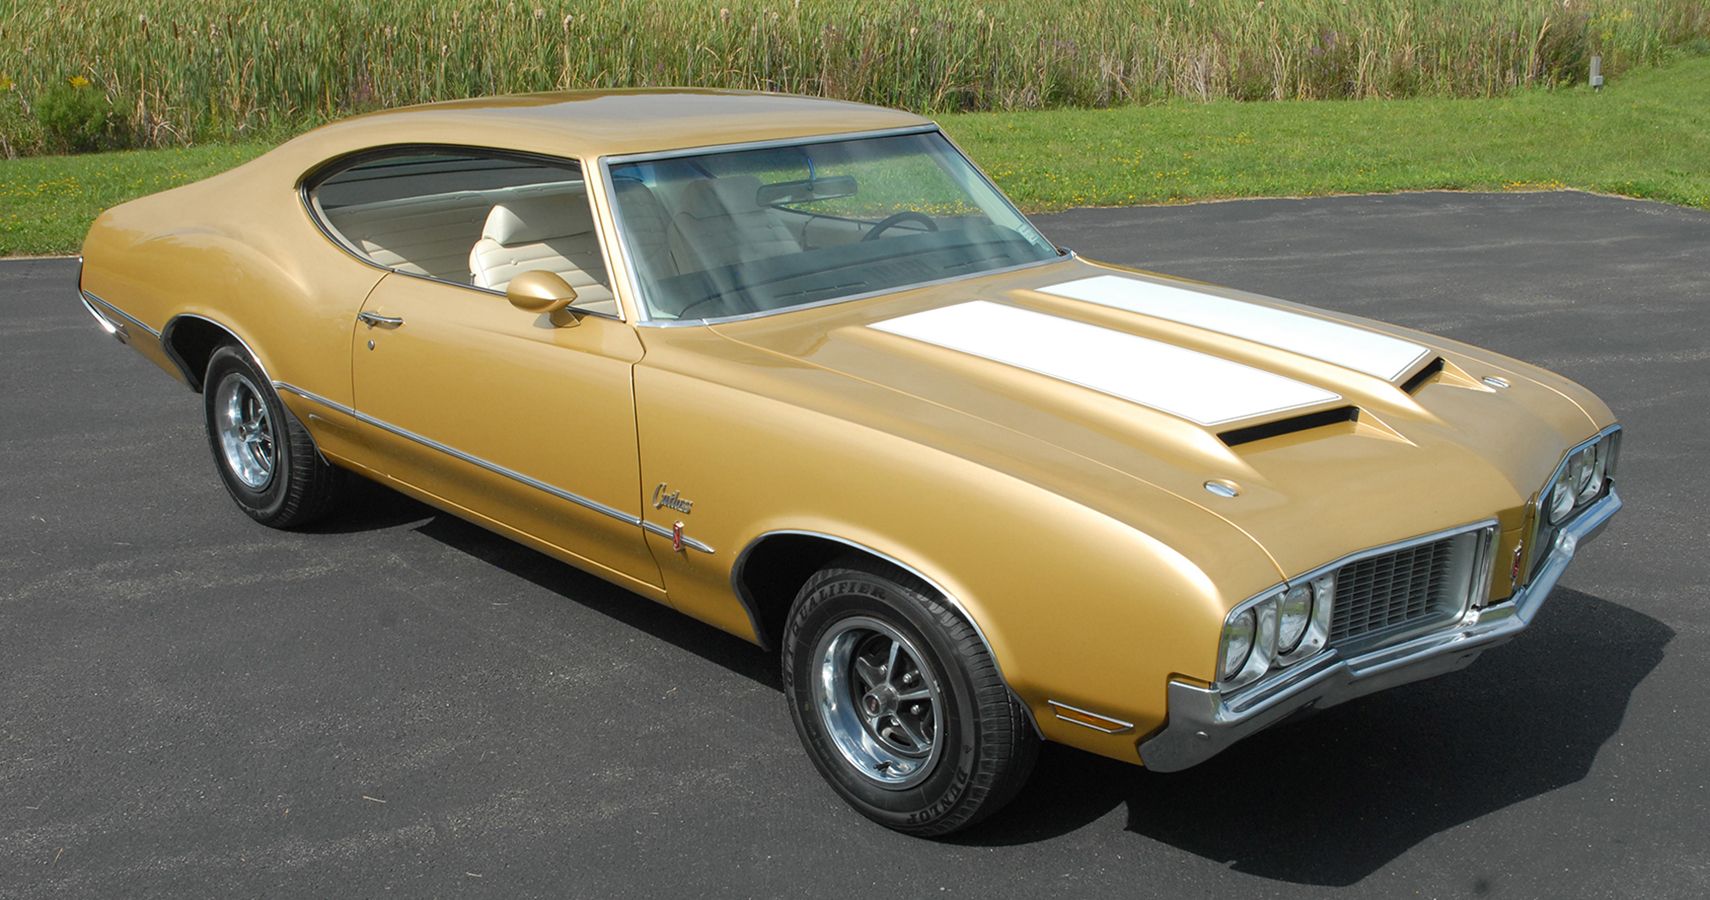 In 1970, The Cutlass Came In Seven Different Body Styles, Three Of Which Were Coupes